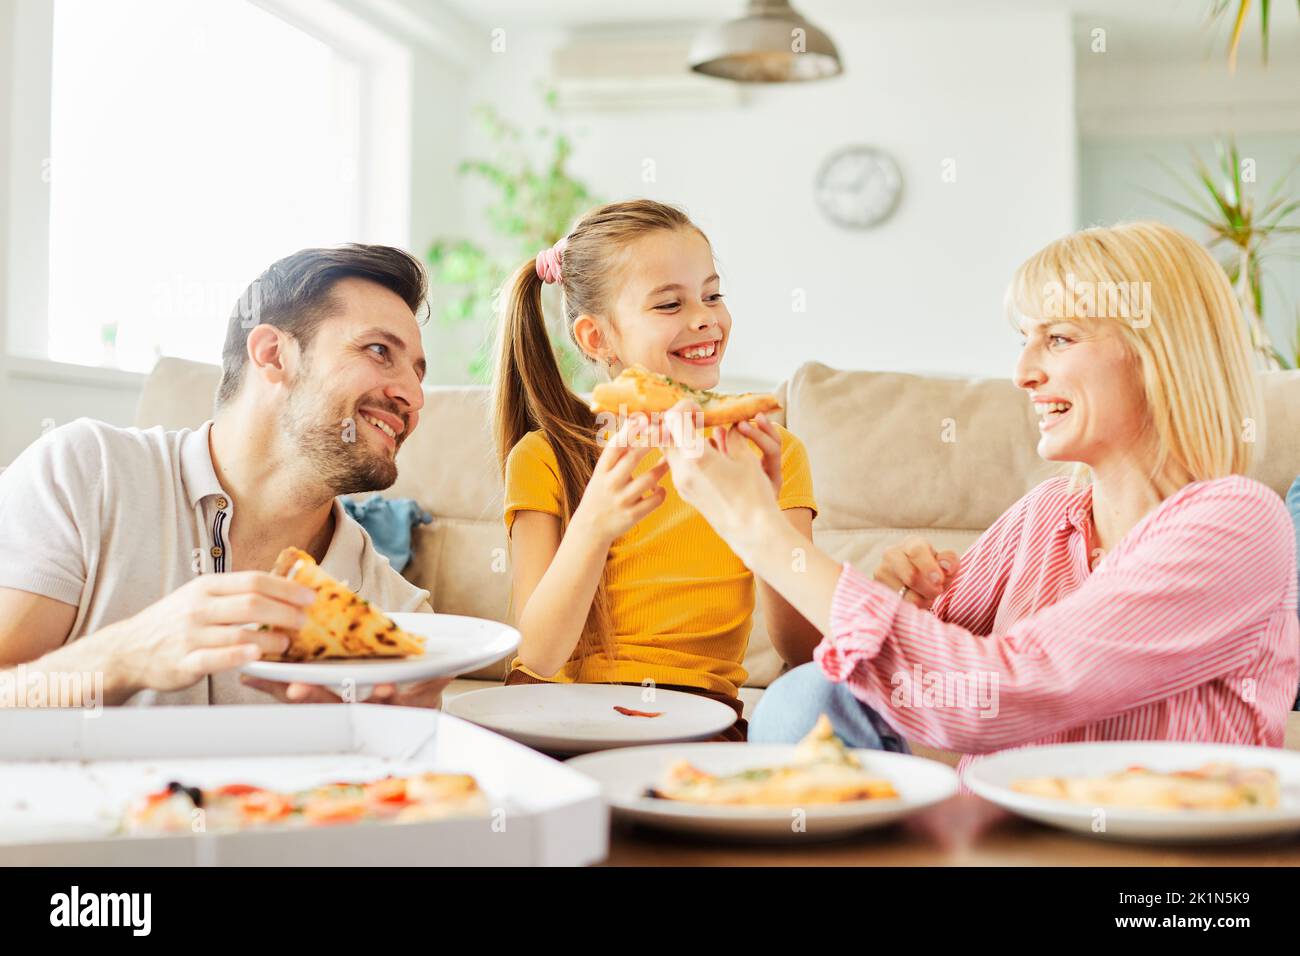 pizza family child food home eating daughter mother father happy meal together lunch dinner man woman girl fun Stock Photo